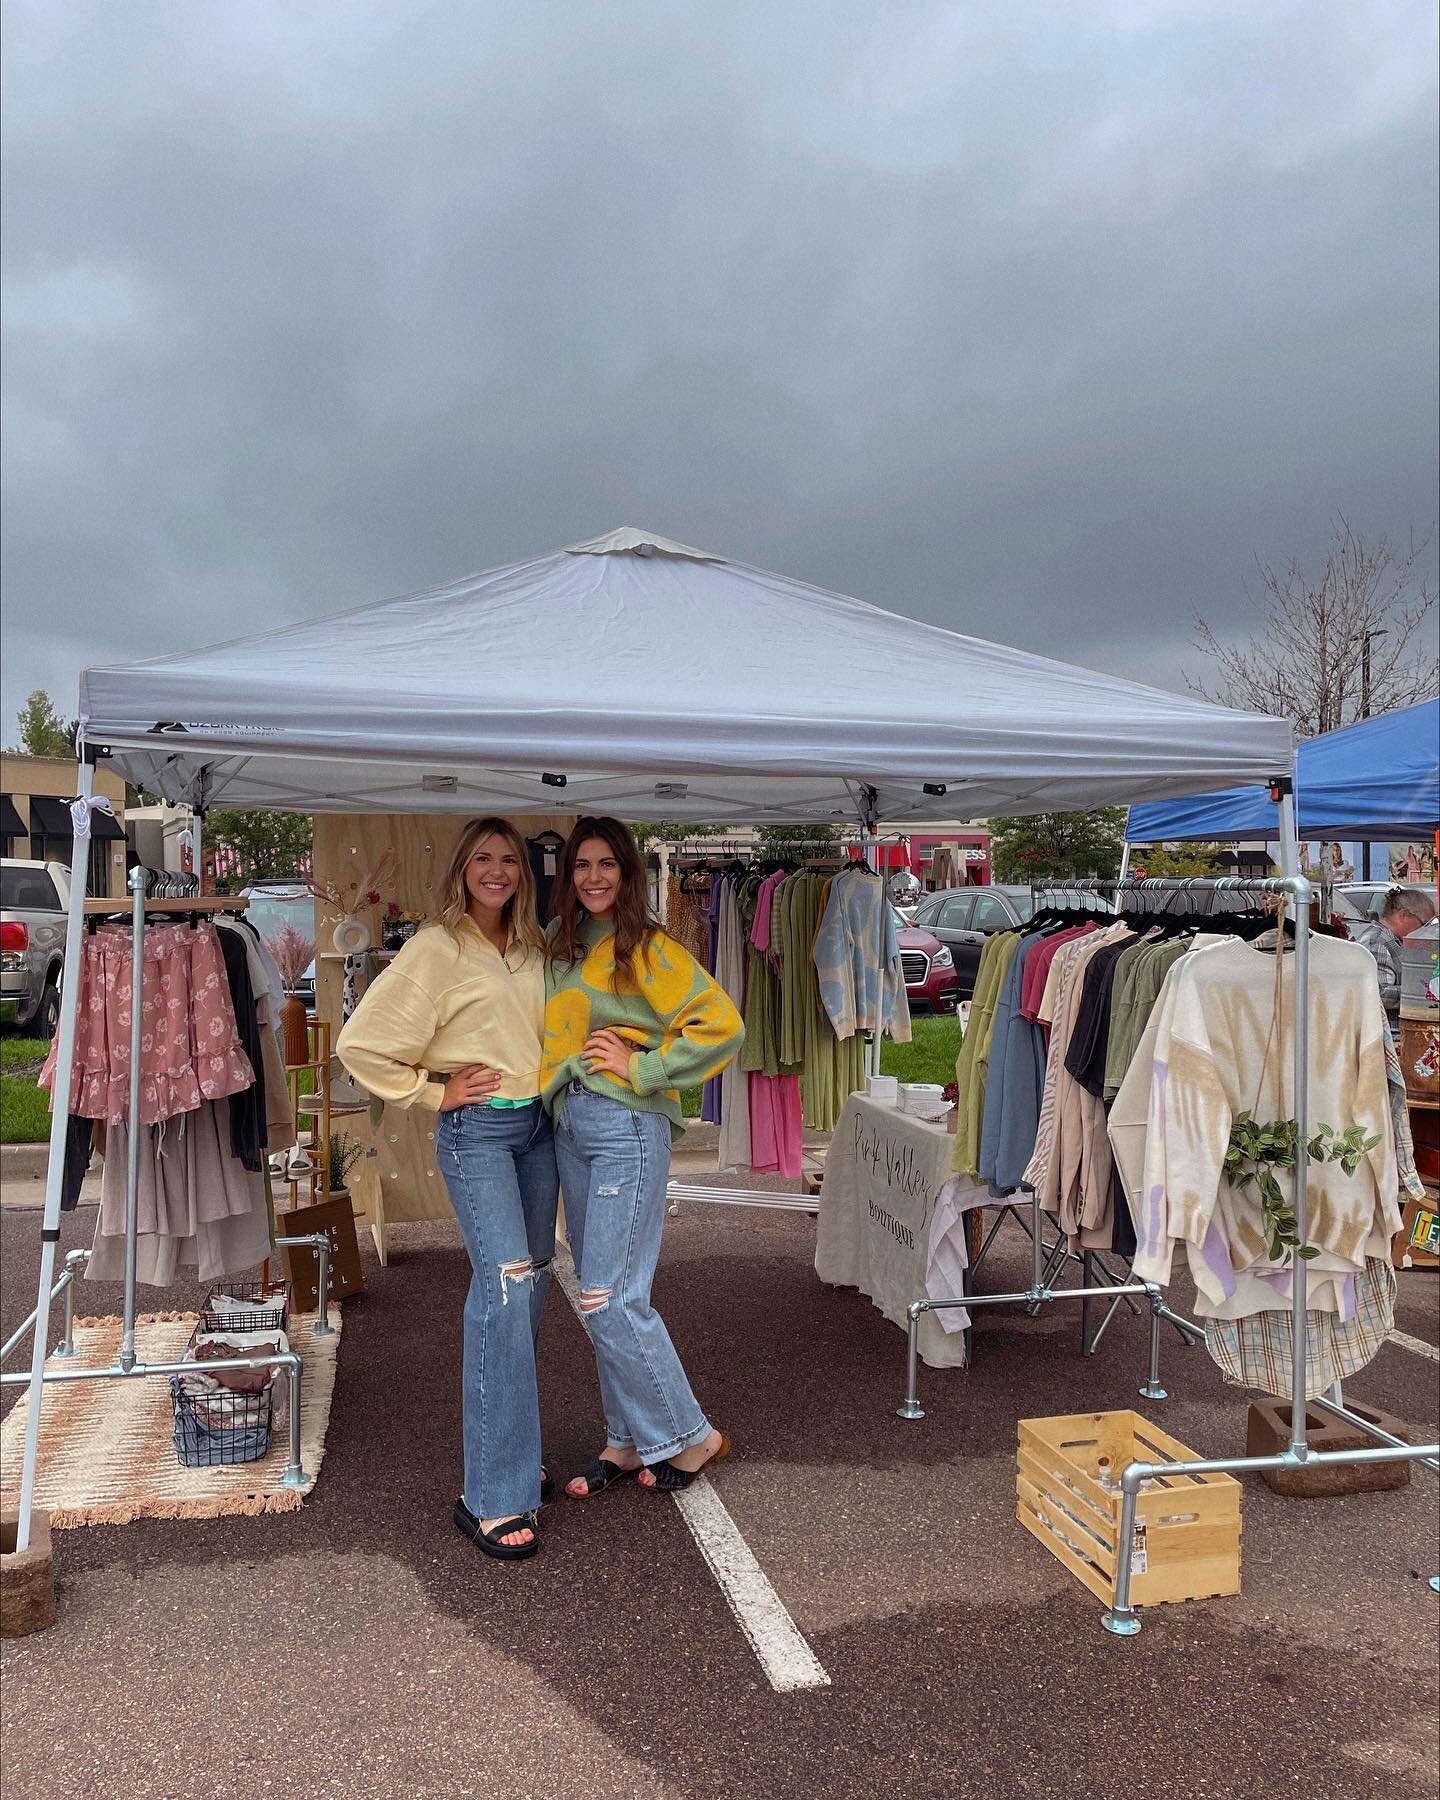 Had another great weekend with @parismarketvintage for the French Brocante Market. 💗 Shout out to everyone who came on that cold rainy day. We can't wait for the next. ✨✨✨

Be sure to visit our site and shop online with us 🧡